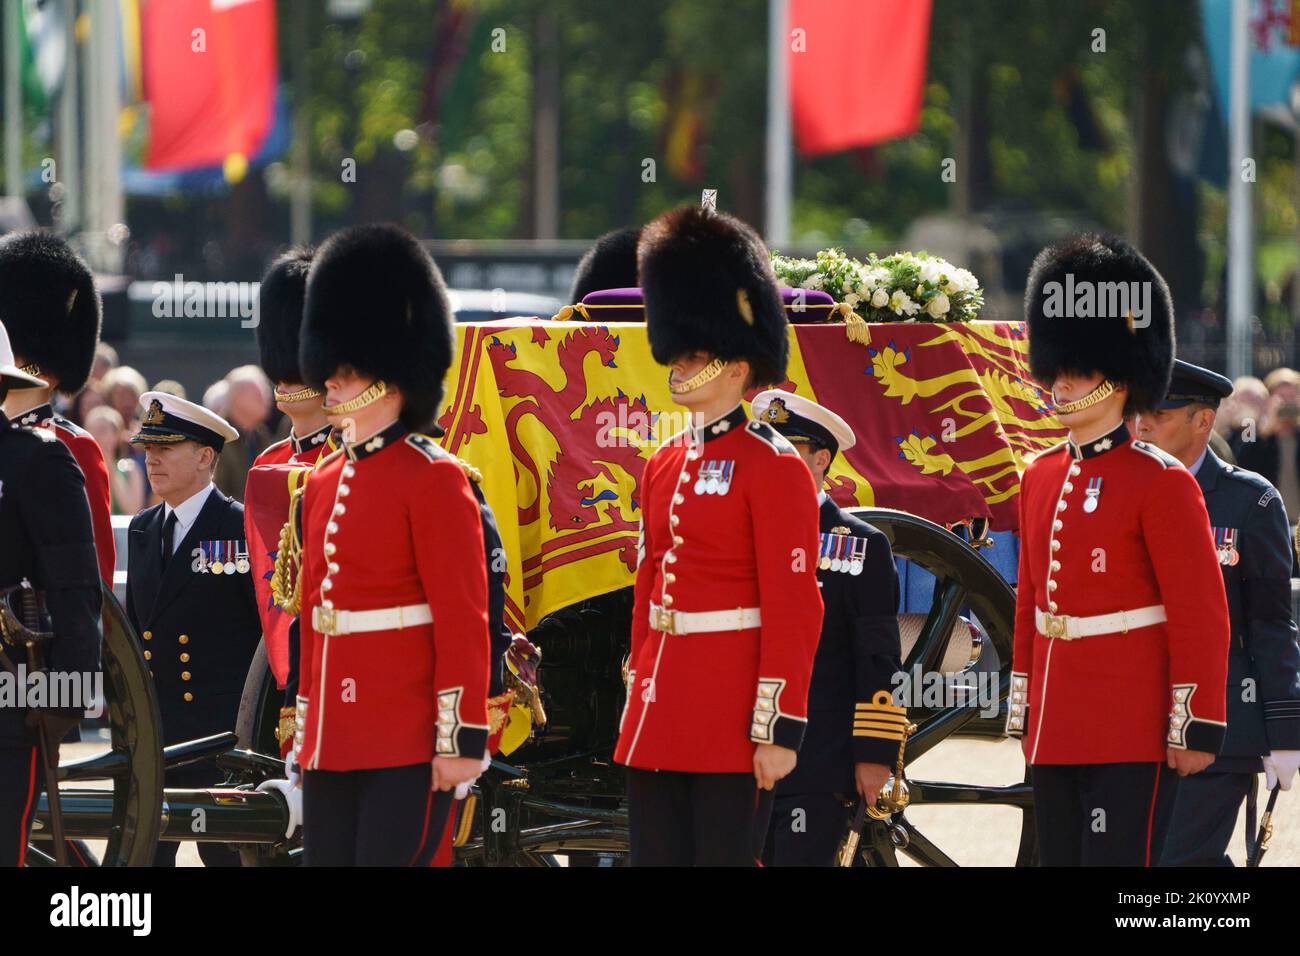 LONDON - SEPTEMBER 14: The procession of Queen Elizabeth II’s coffin passes across Horse Guards Parade, travelling from Buckingham Palace to Westminster Hall. Walking behind the coffin are Prince’s William and Harry, Prince Edward, Prince Andrew, Princess Anne, along with King Charles III, as it is carried on a gun carriage, followed by other members of the Royal Family, on September 14, 2022. Photo by David Levenson Stock Photo